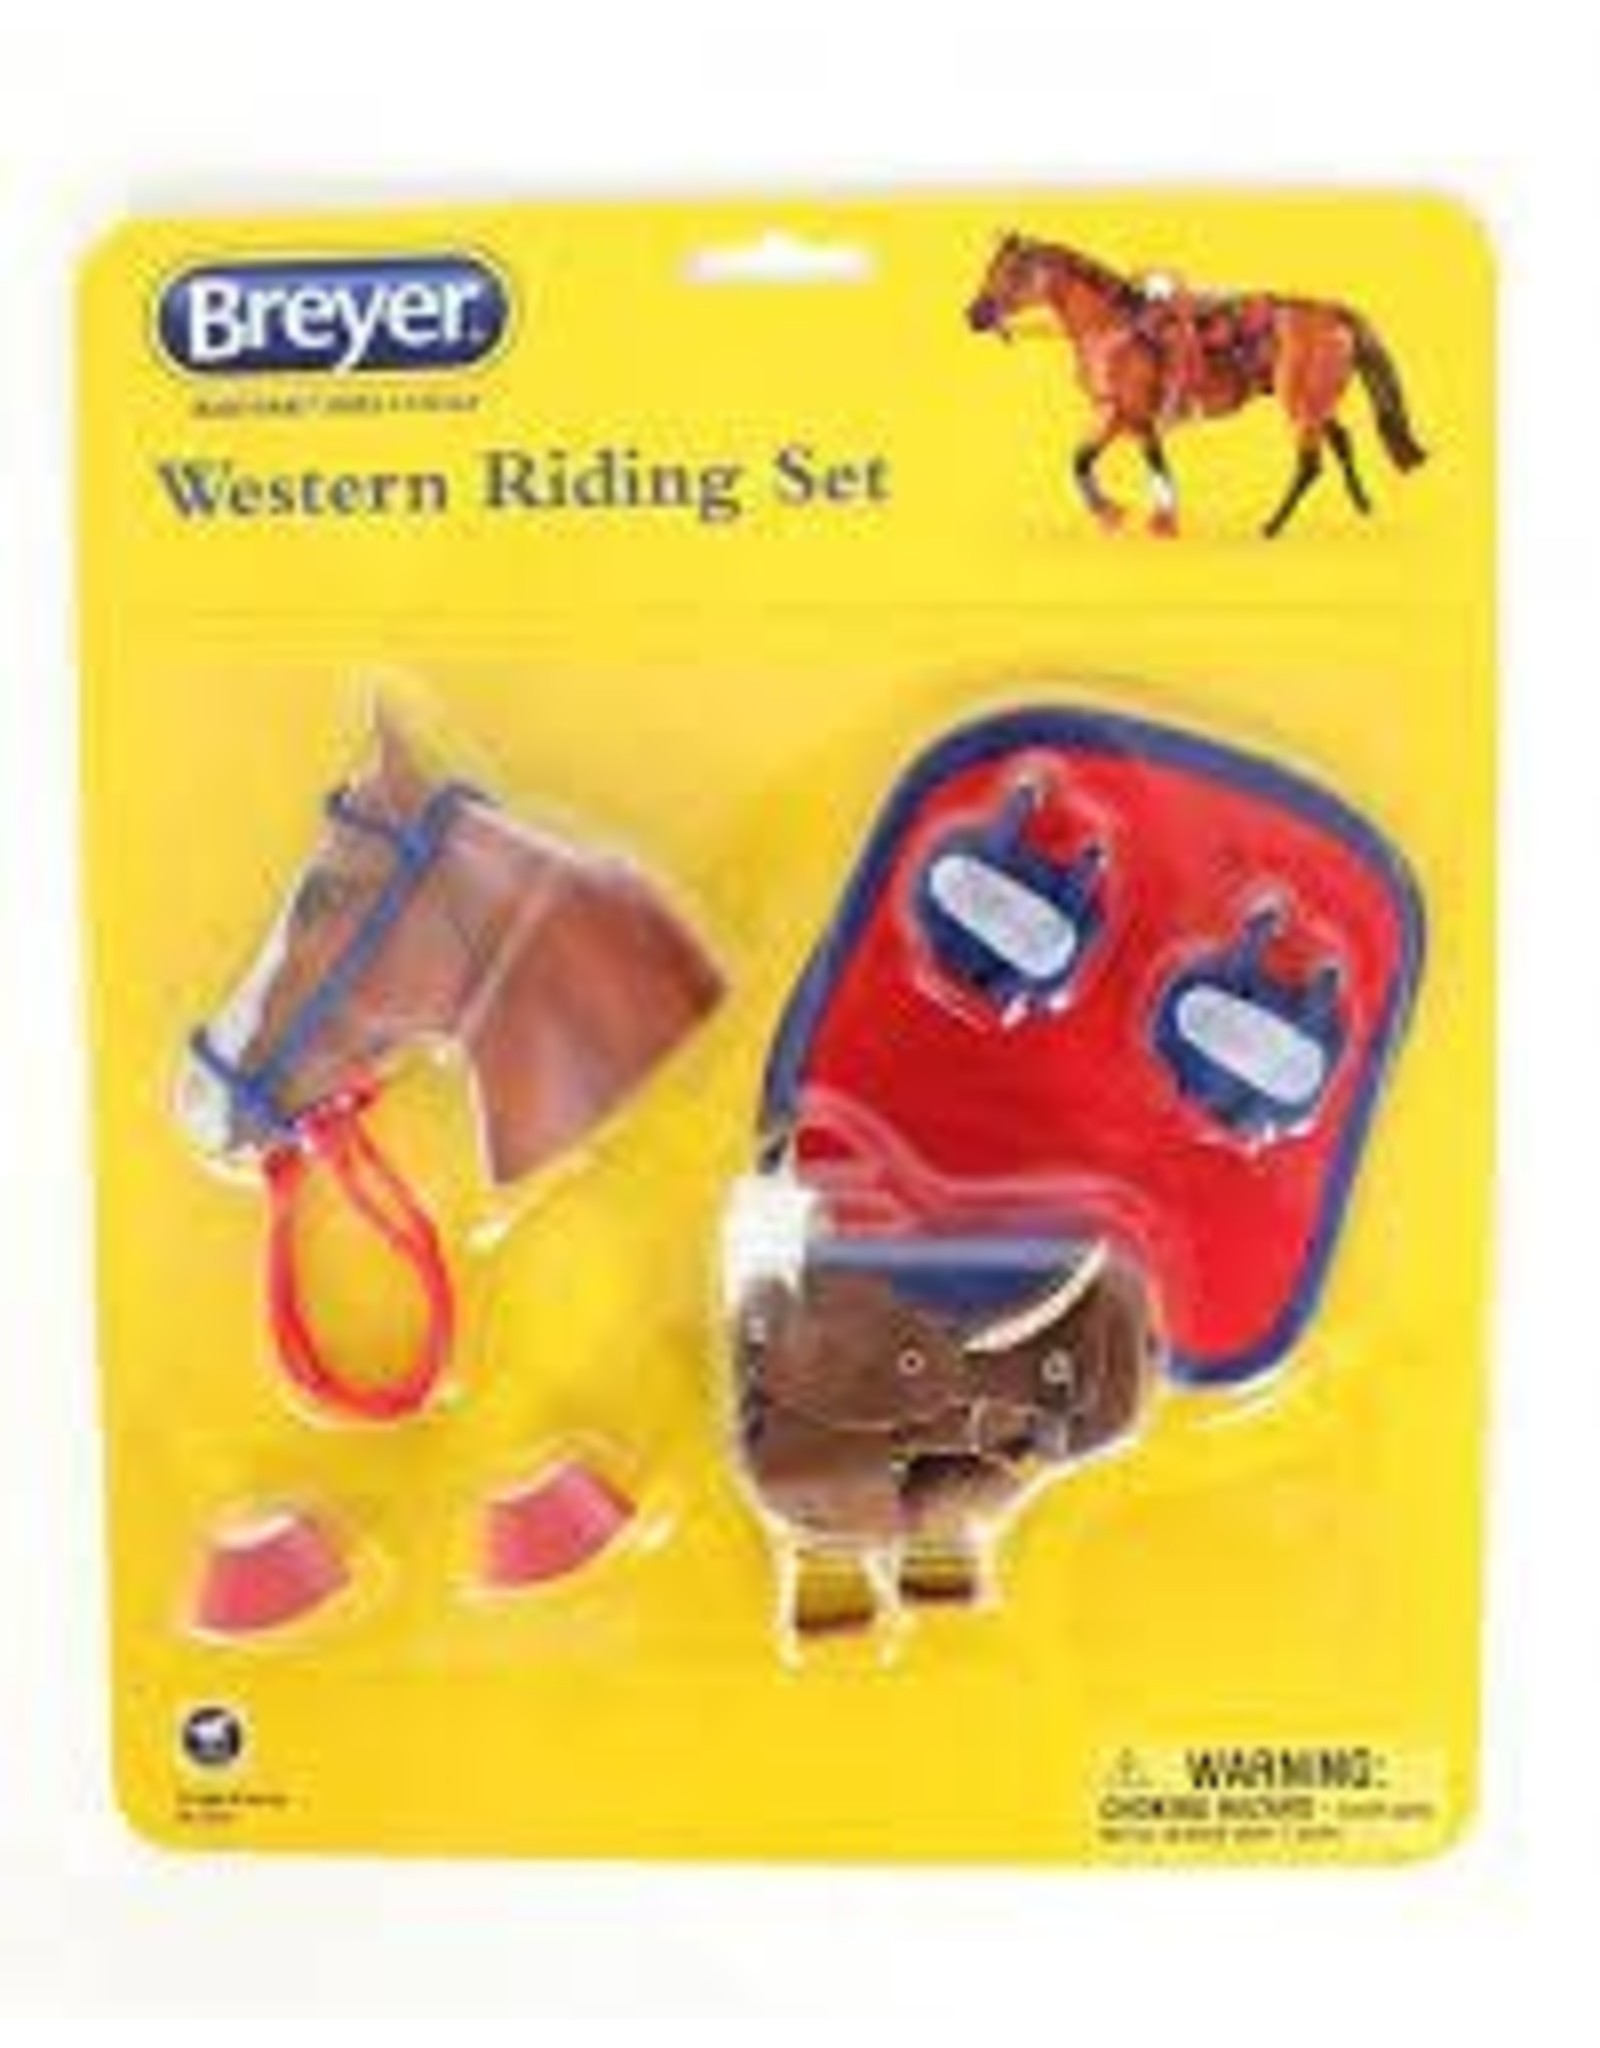 Western Riding Set in Hot Colors